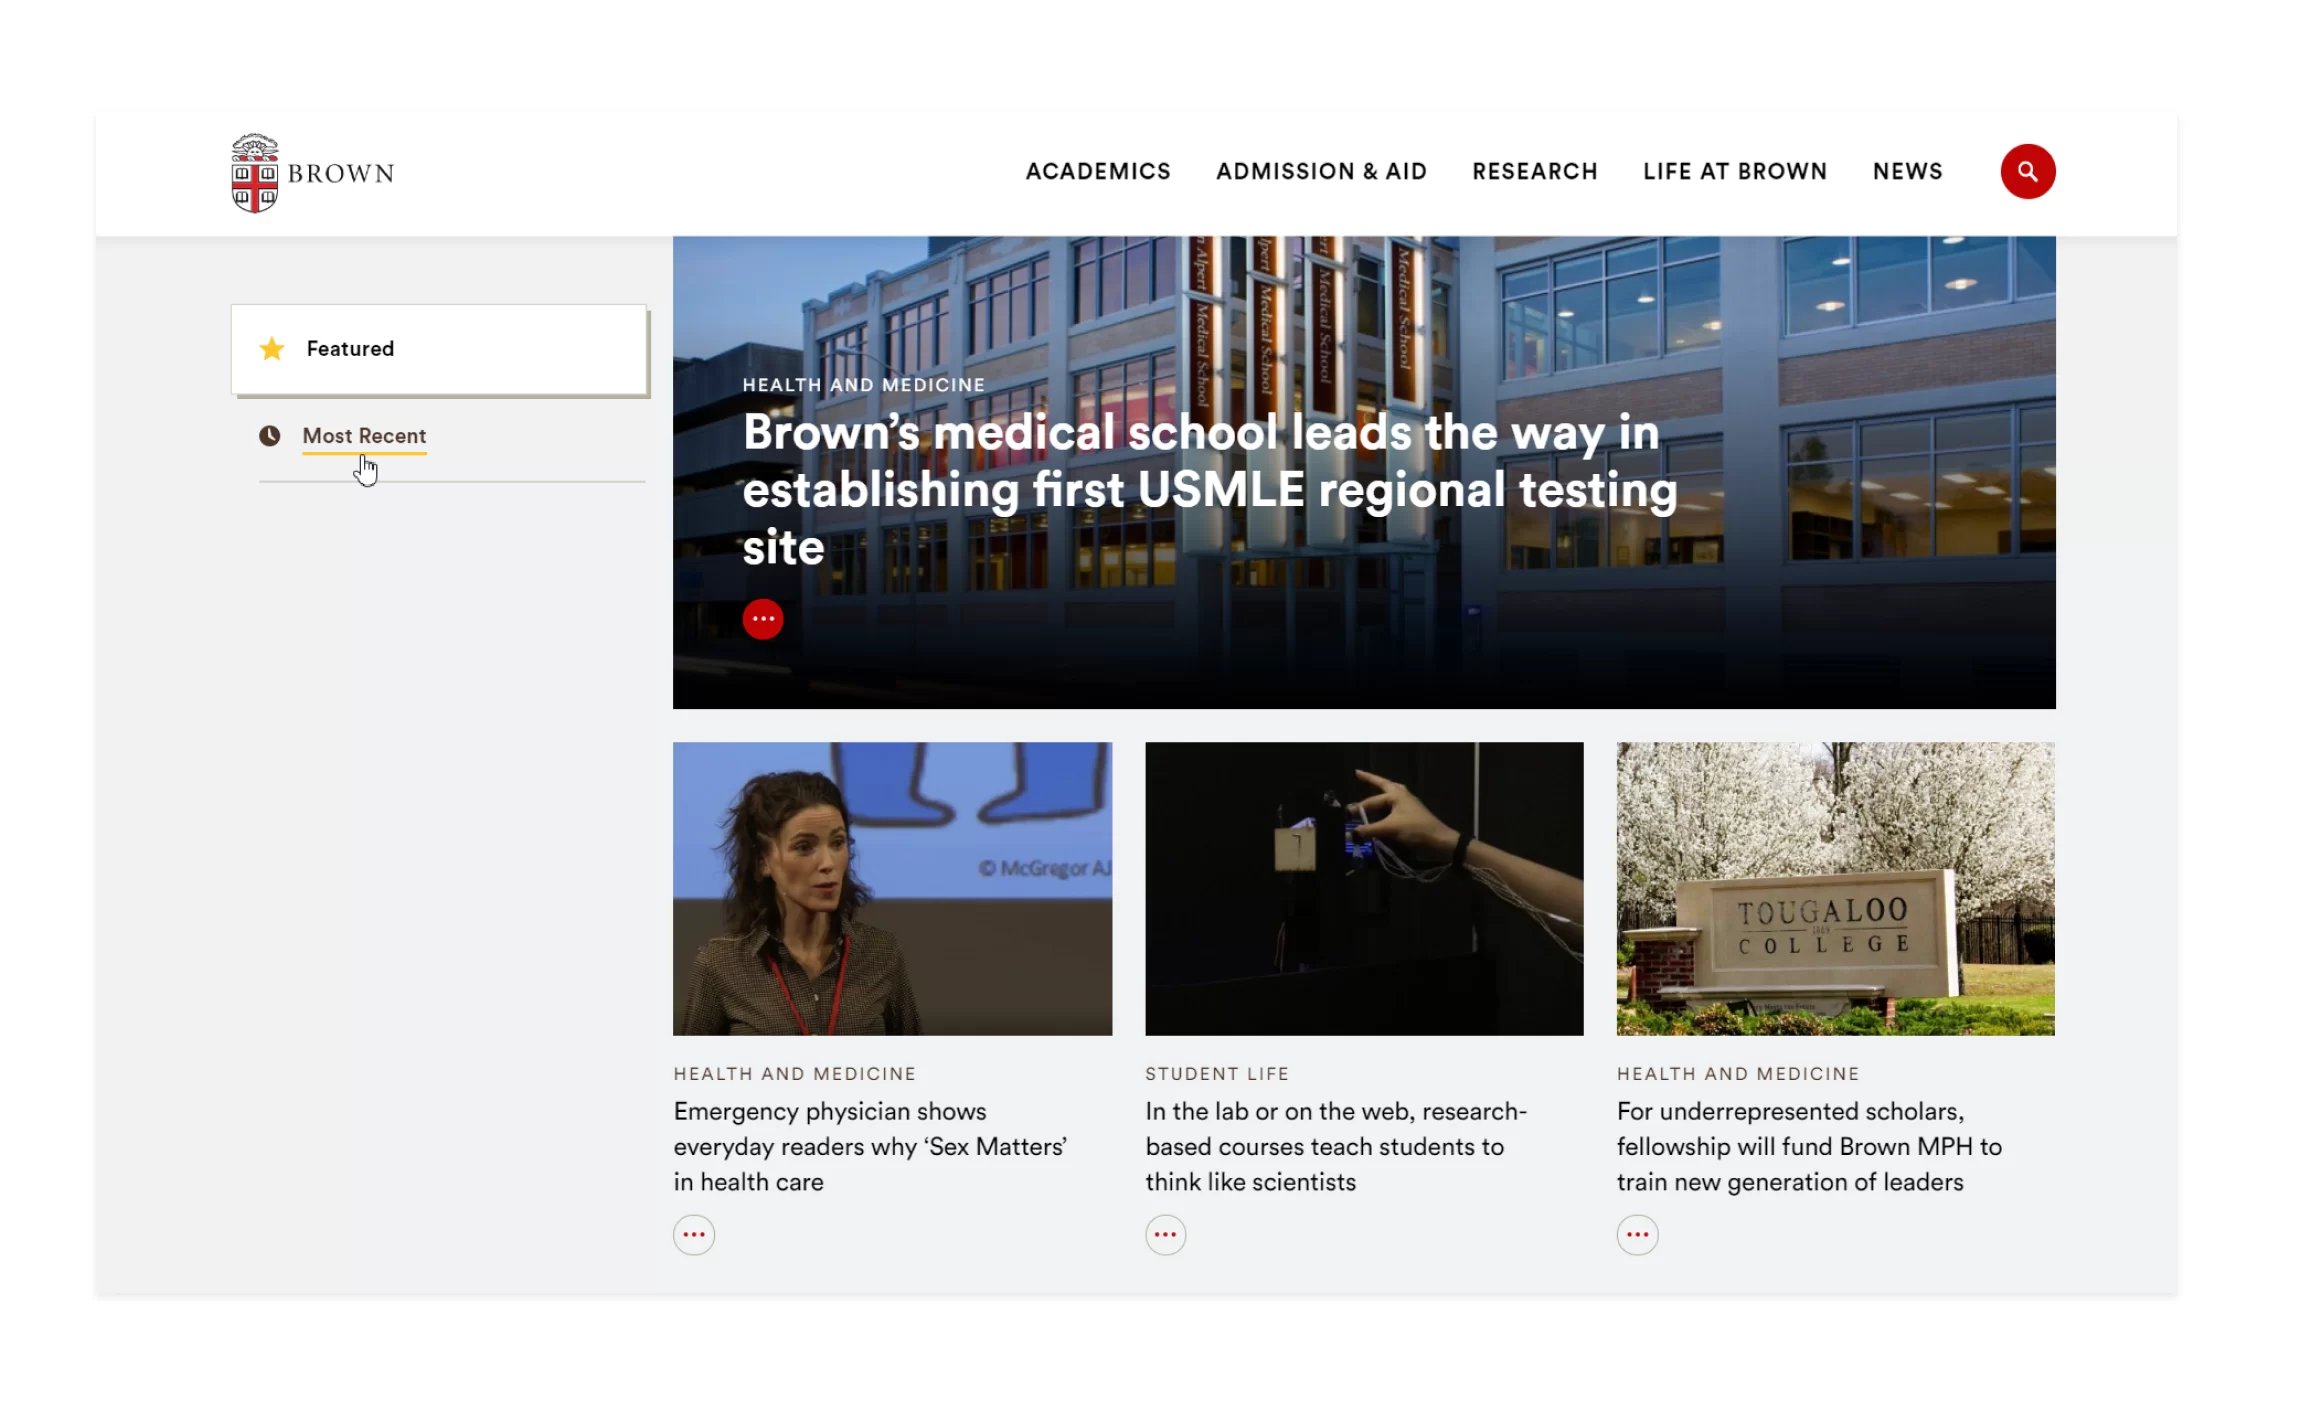 Brown University website, the news section